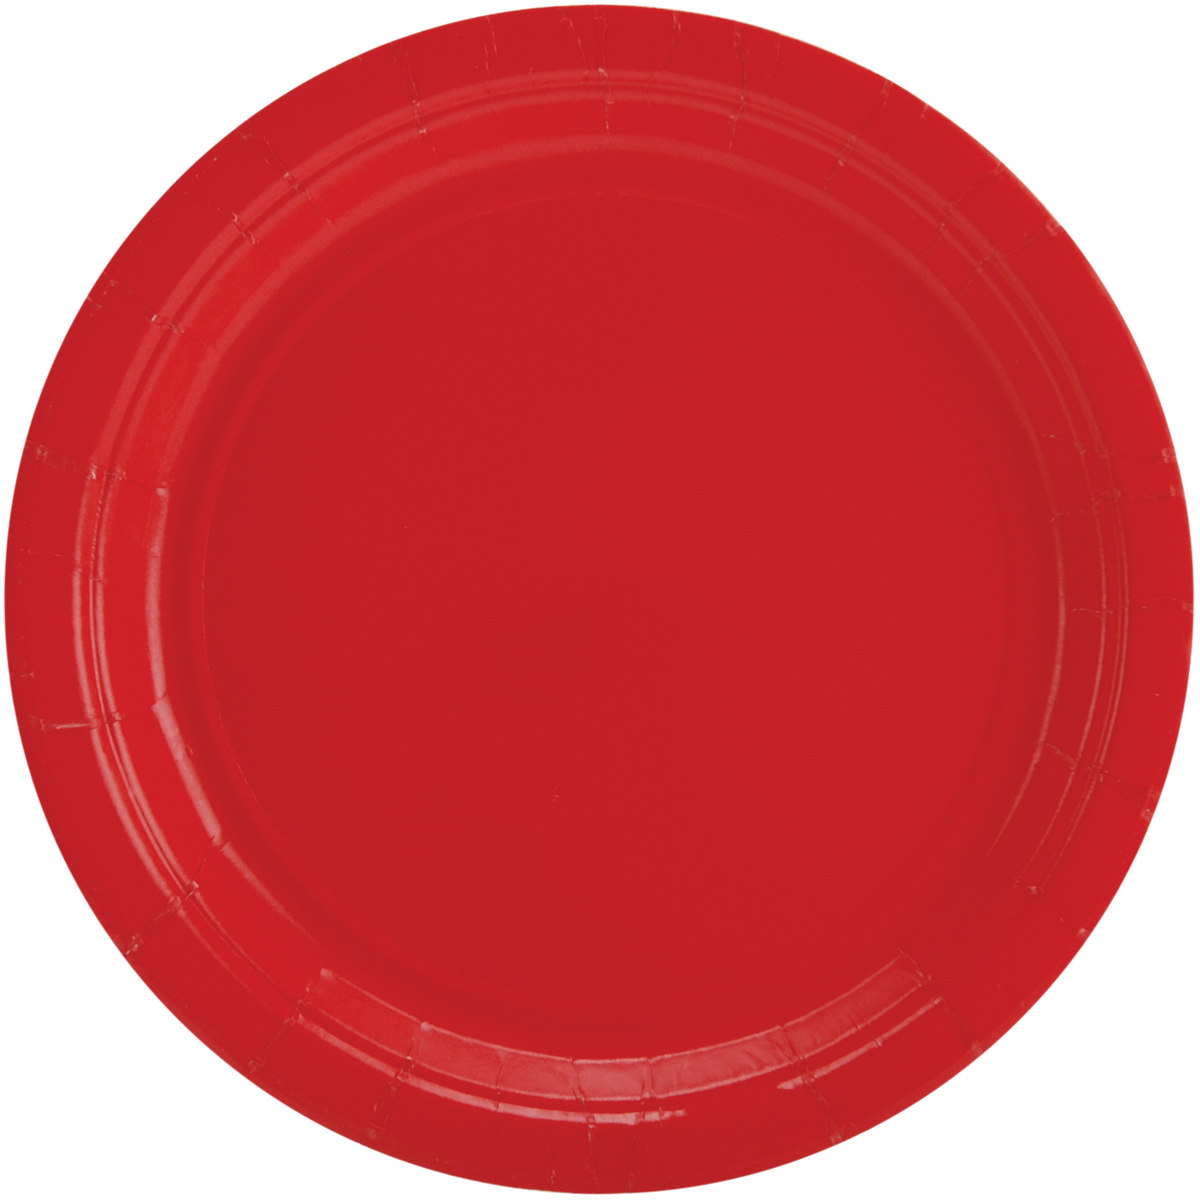 9" Paper Lunch Plates, Apple Red, 50 ct - image 2 of 2